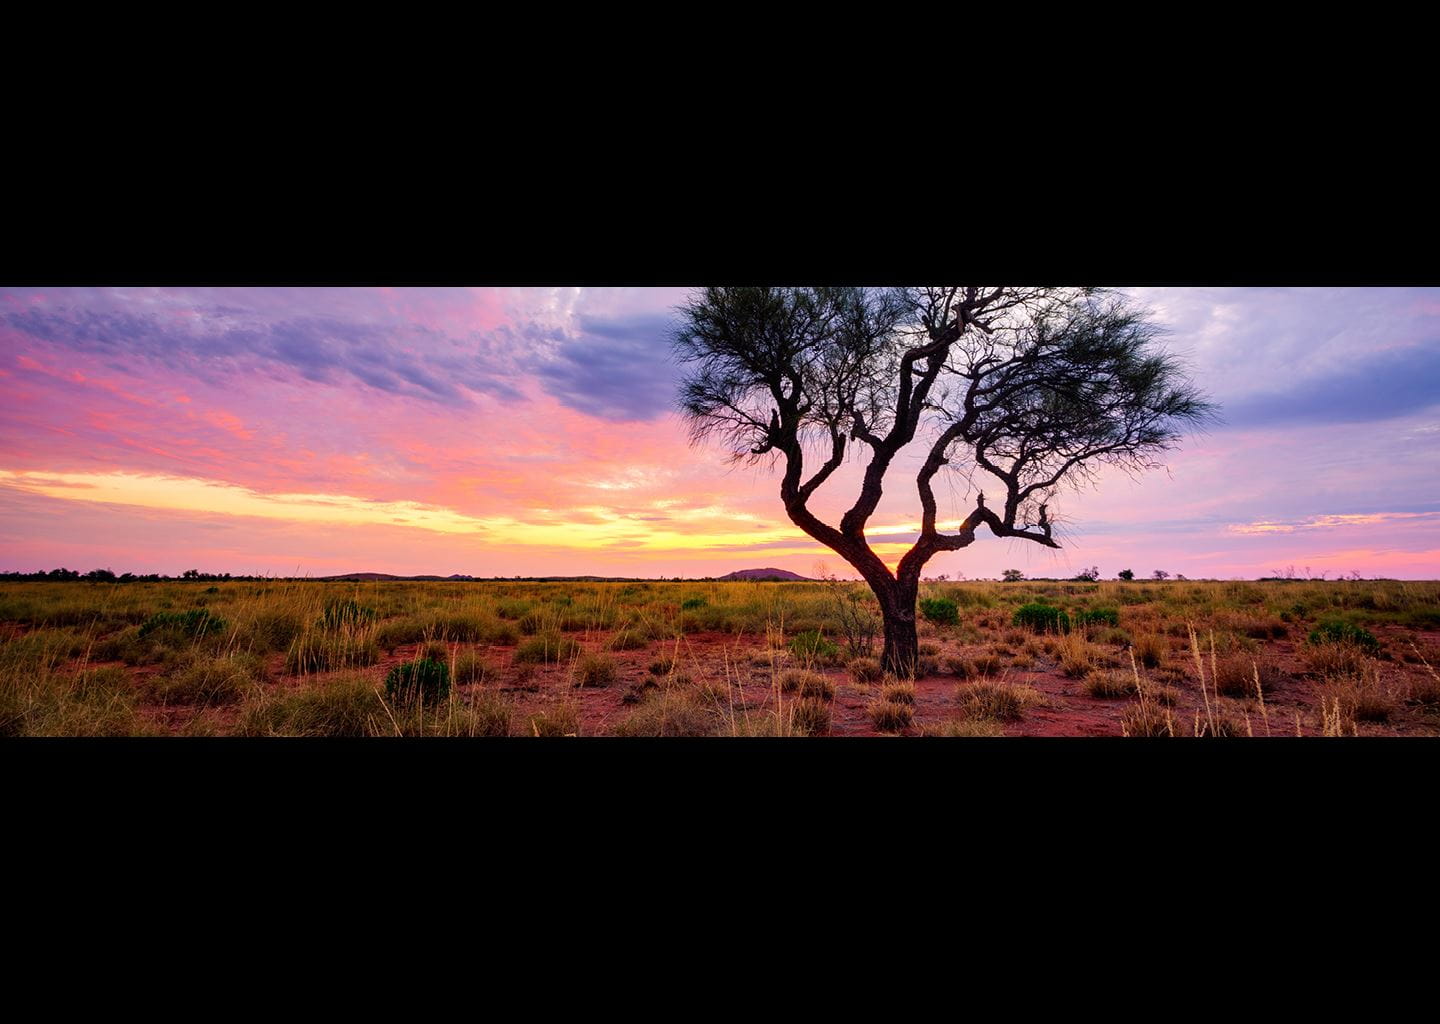 Sunset with tree on red soil and grassy landscape